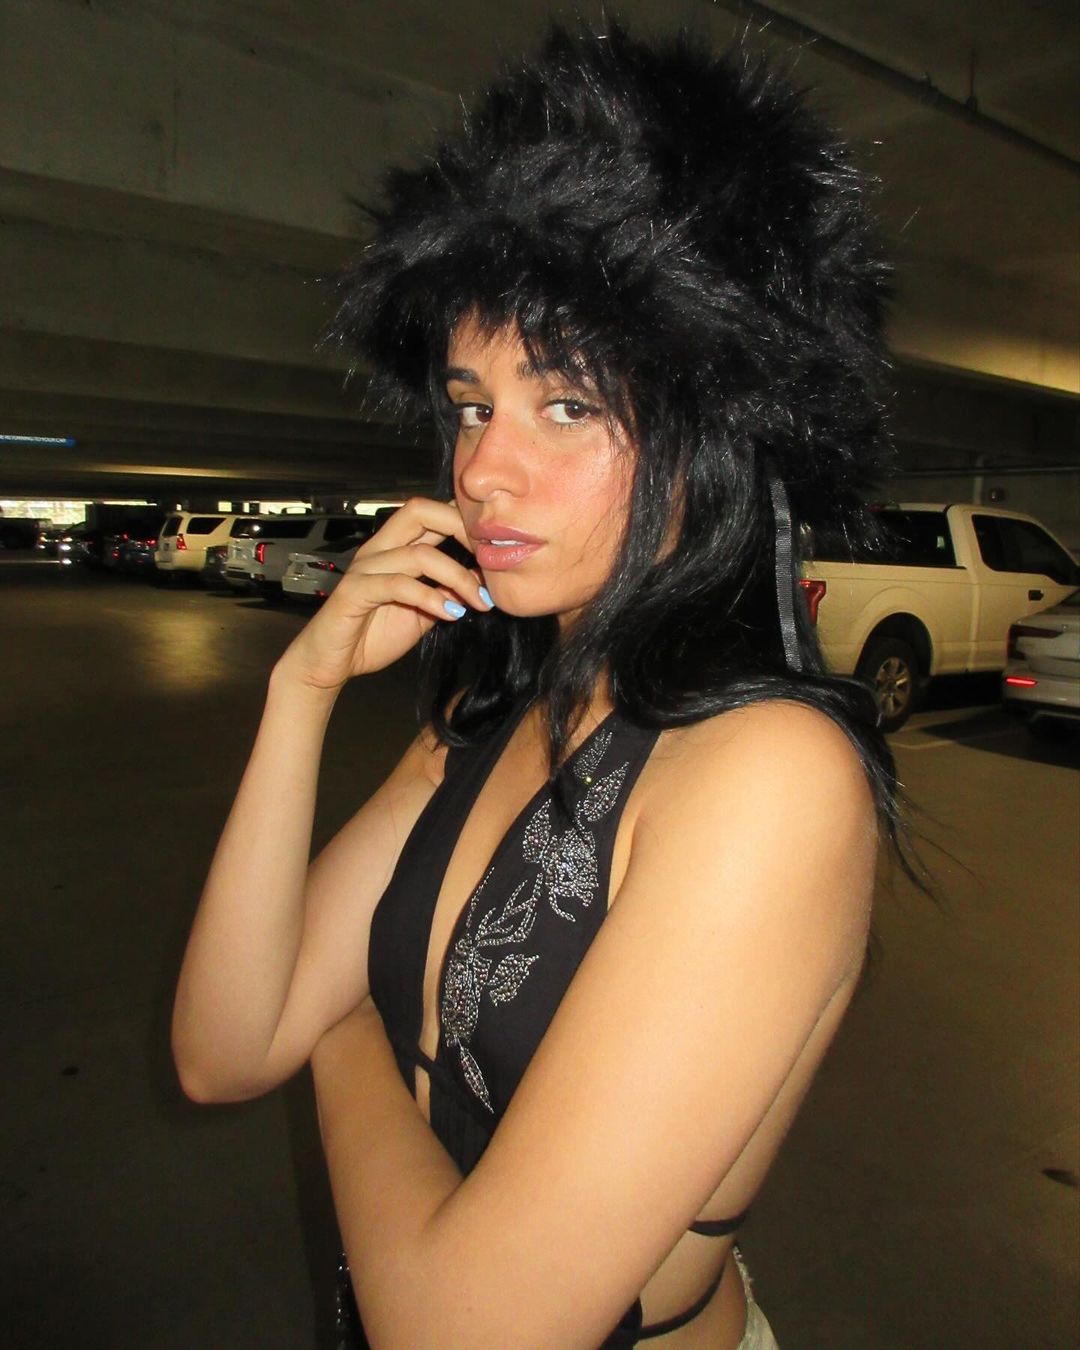 Photos n°1 : Camila Cabello Gets Cryptic in the Parking Garage!